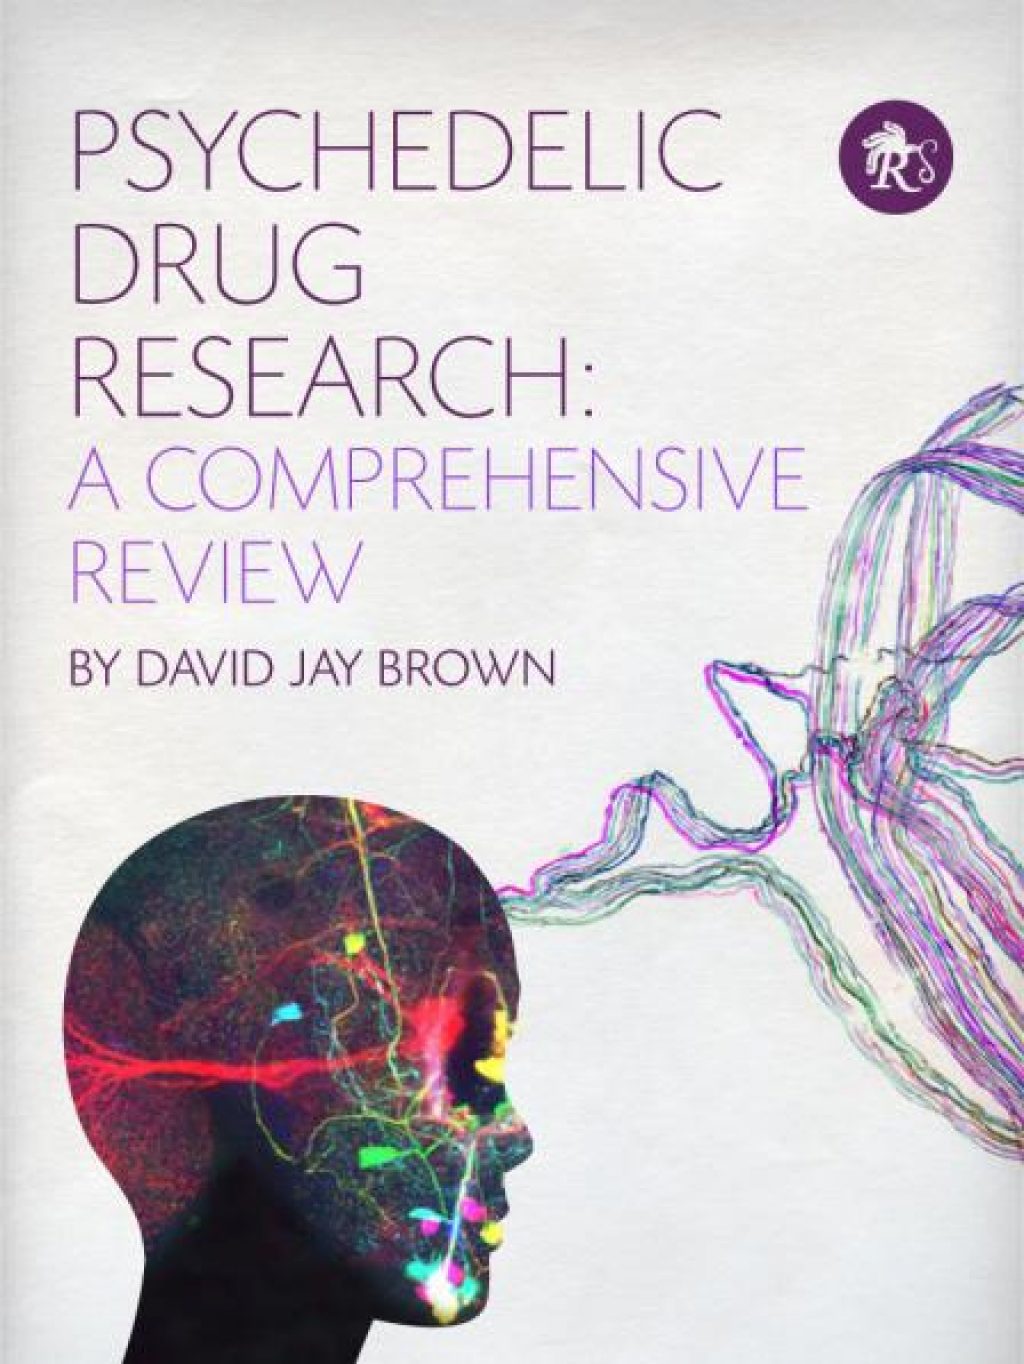 Psychedelic Drug Research Reality Sandwich